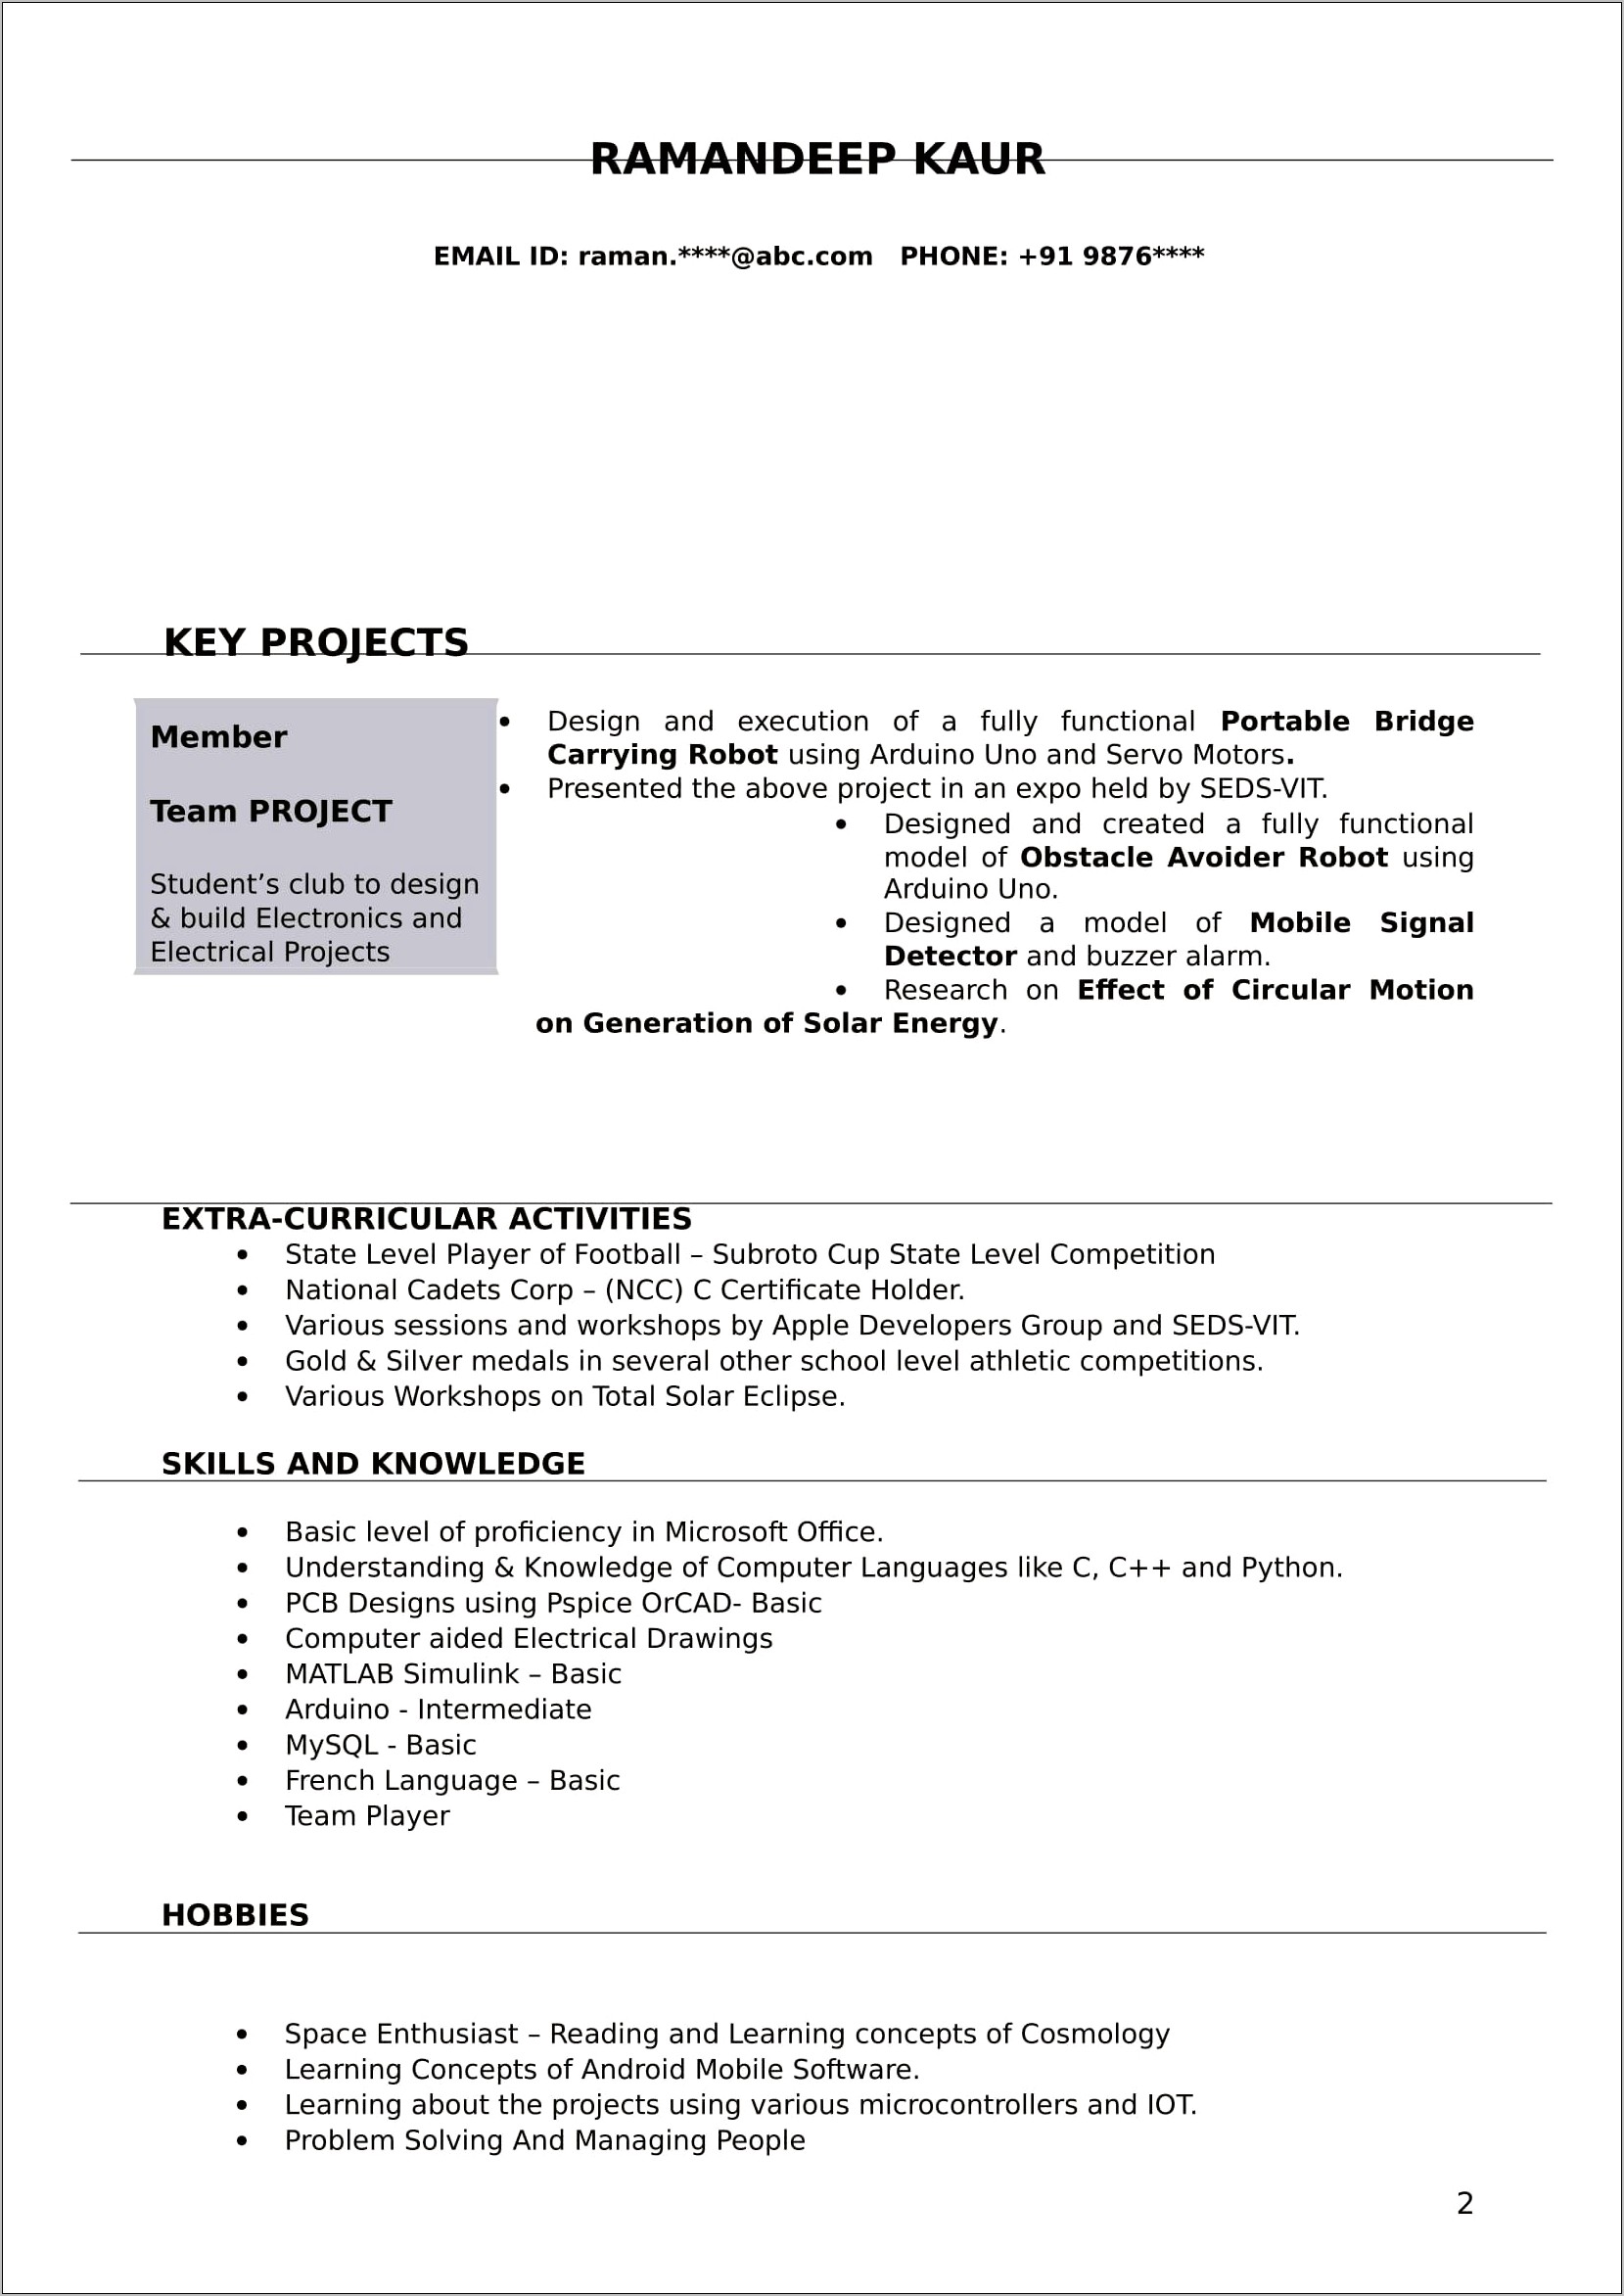 Sample Resume For Electrical Engineer Fresher Doc